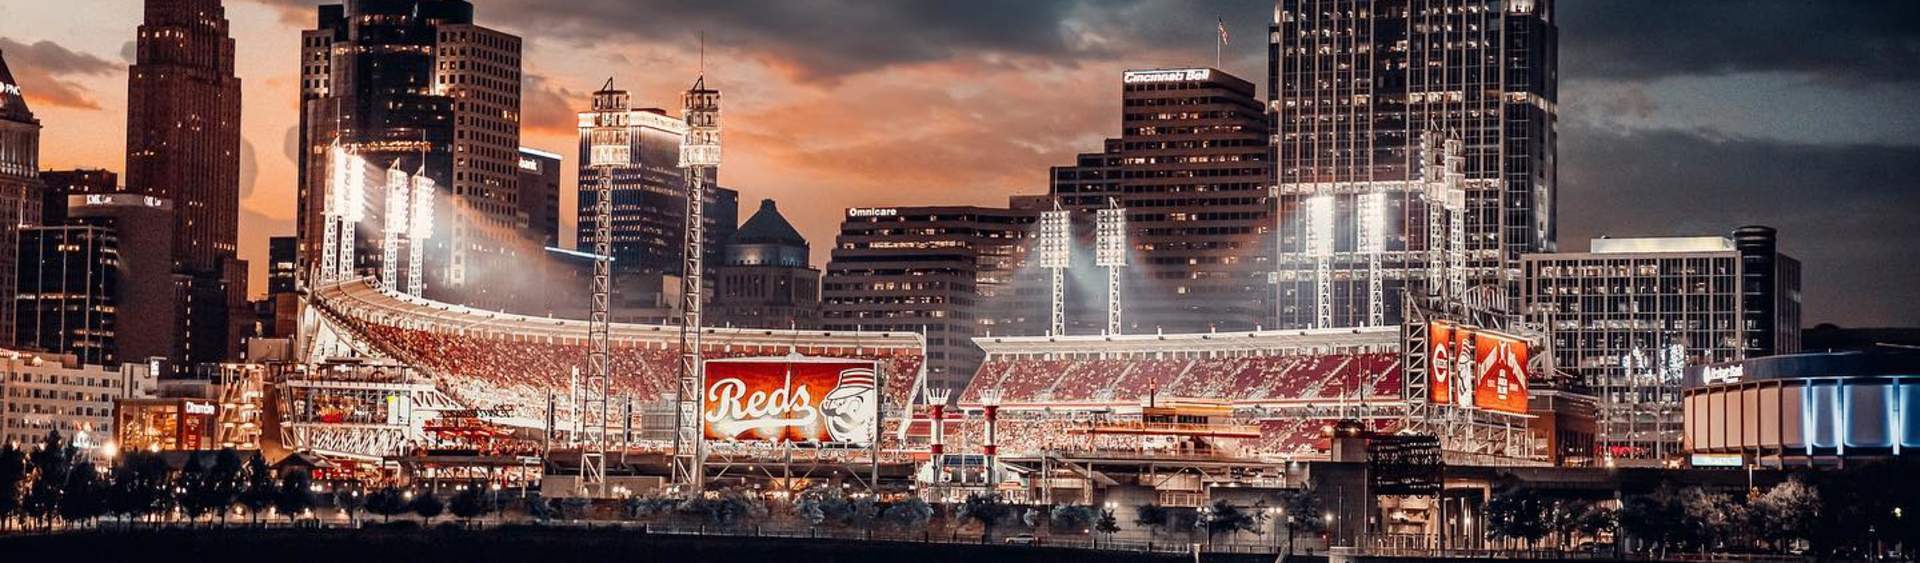 Great American Ball Park Policies and Procedures